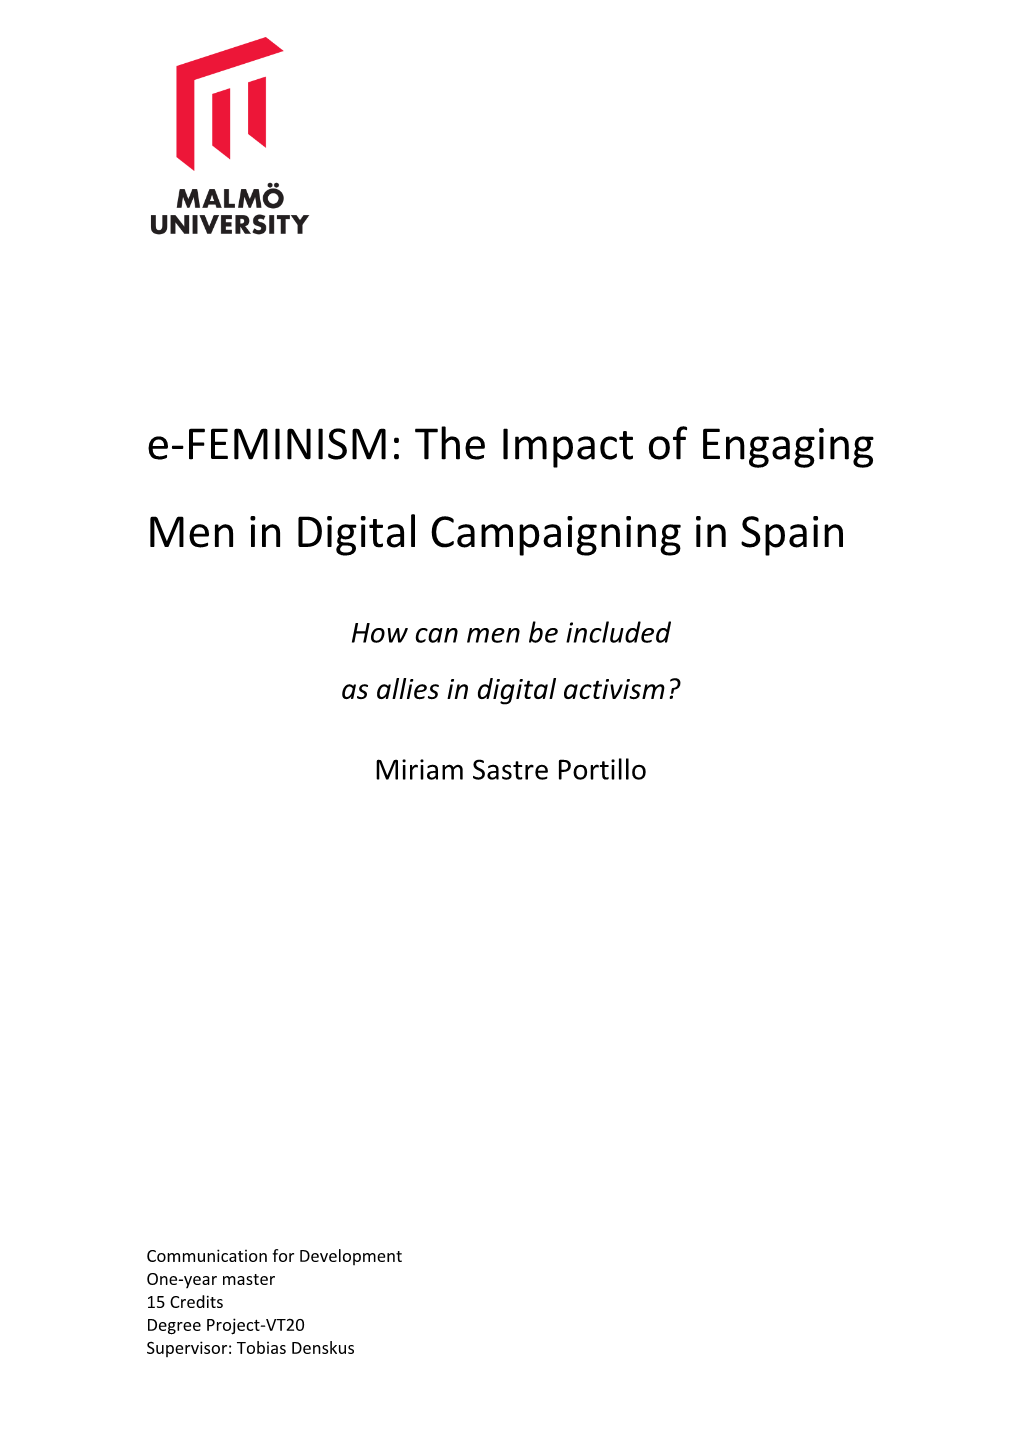 E-FEMINISM: the Impact of Engaging Men in Digital Campaigning in Spain